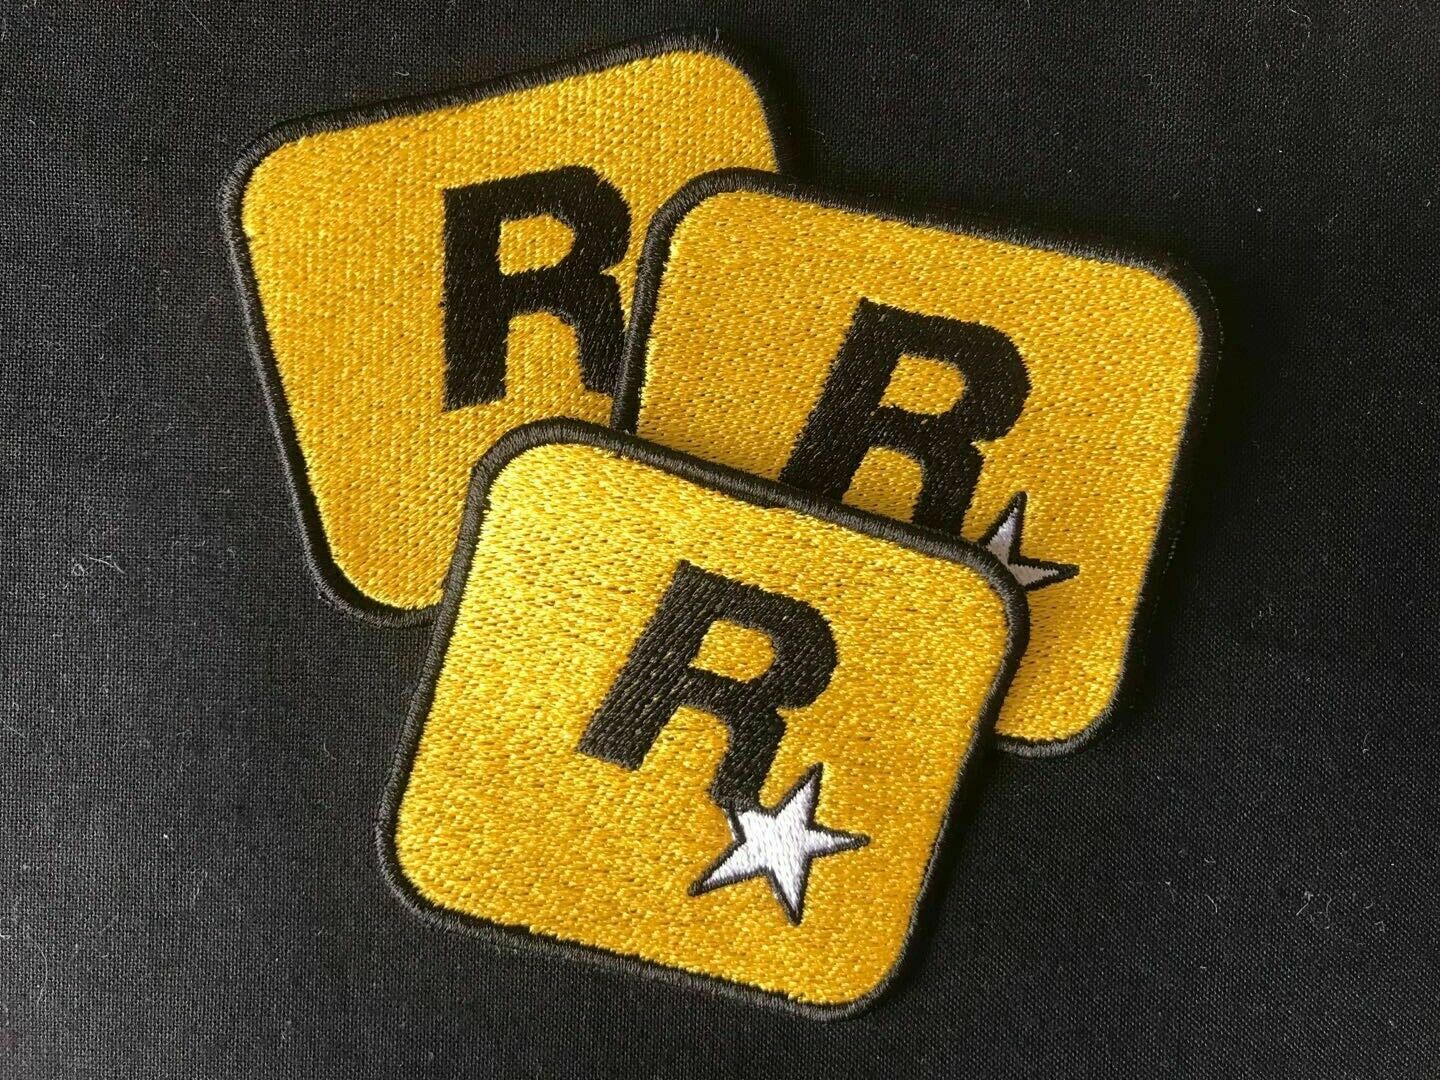 2 PIECES ROCKSTAR PATCH GAMES PLAYSTATION LOGO PS4 VIDEO GAME IRON ON YELLOW  Handmade